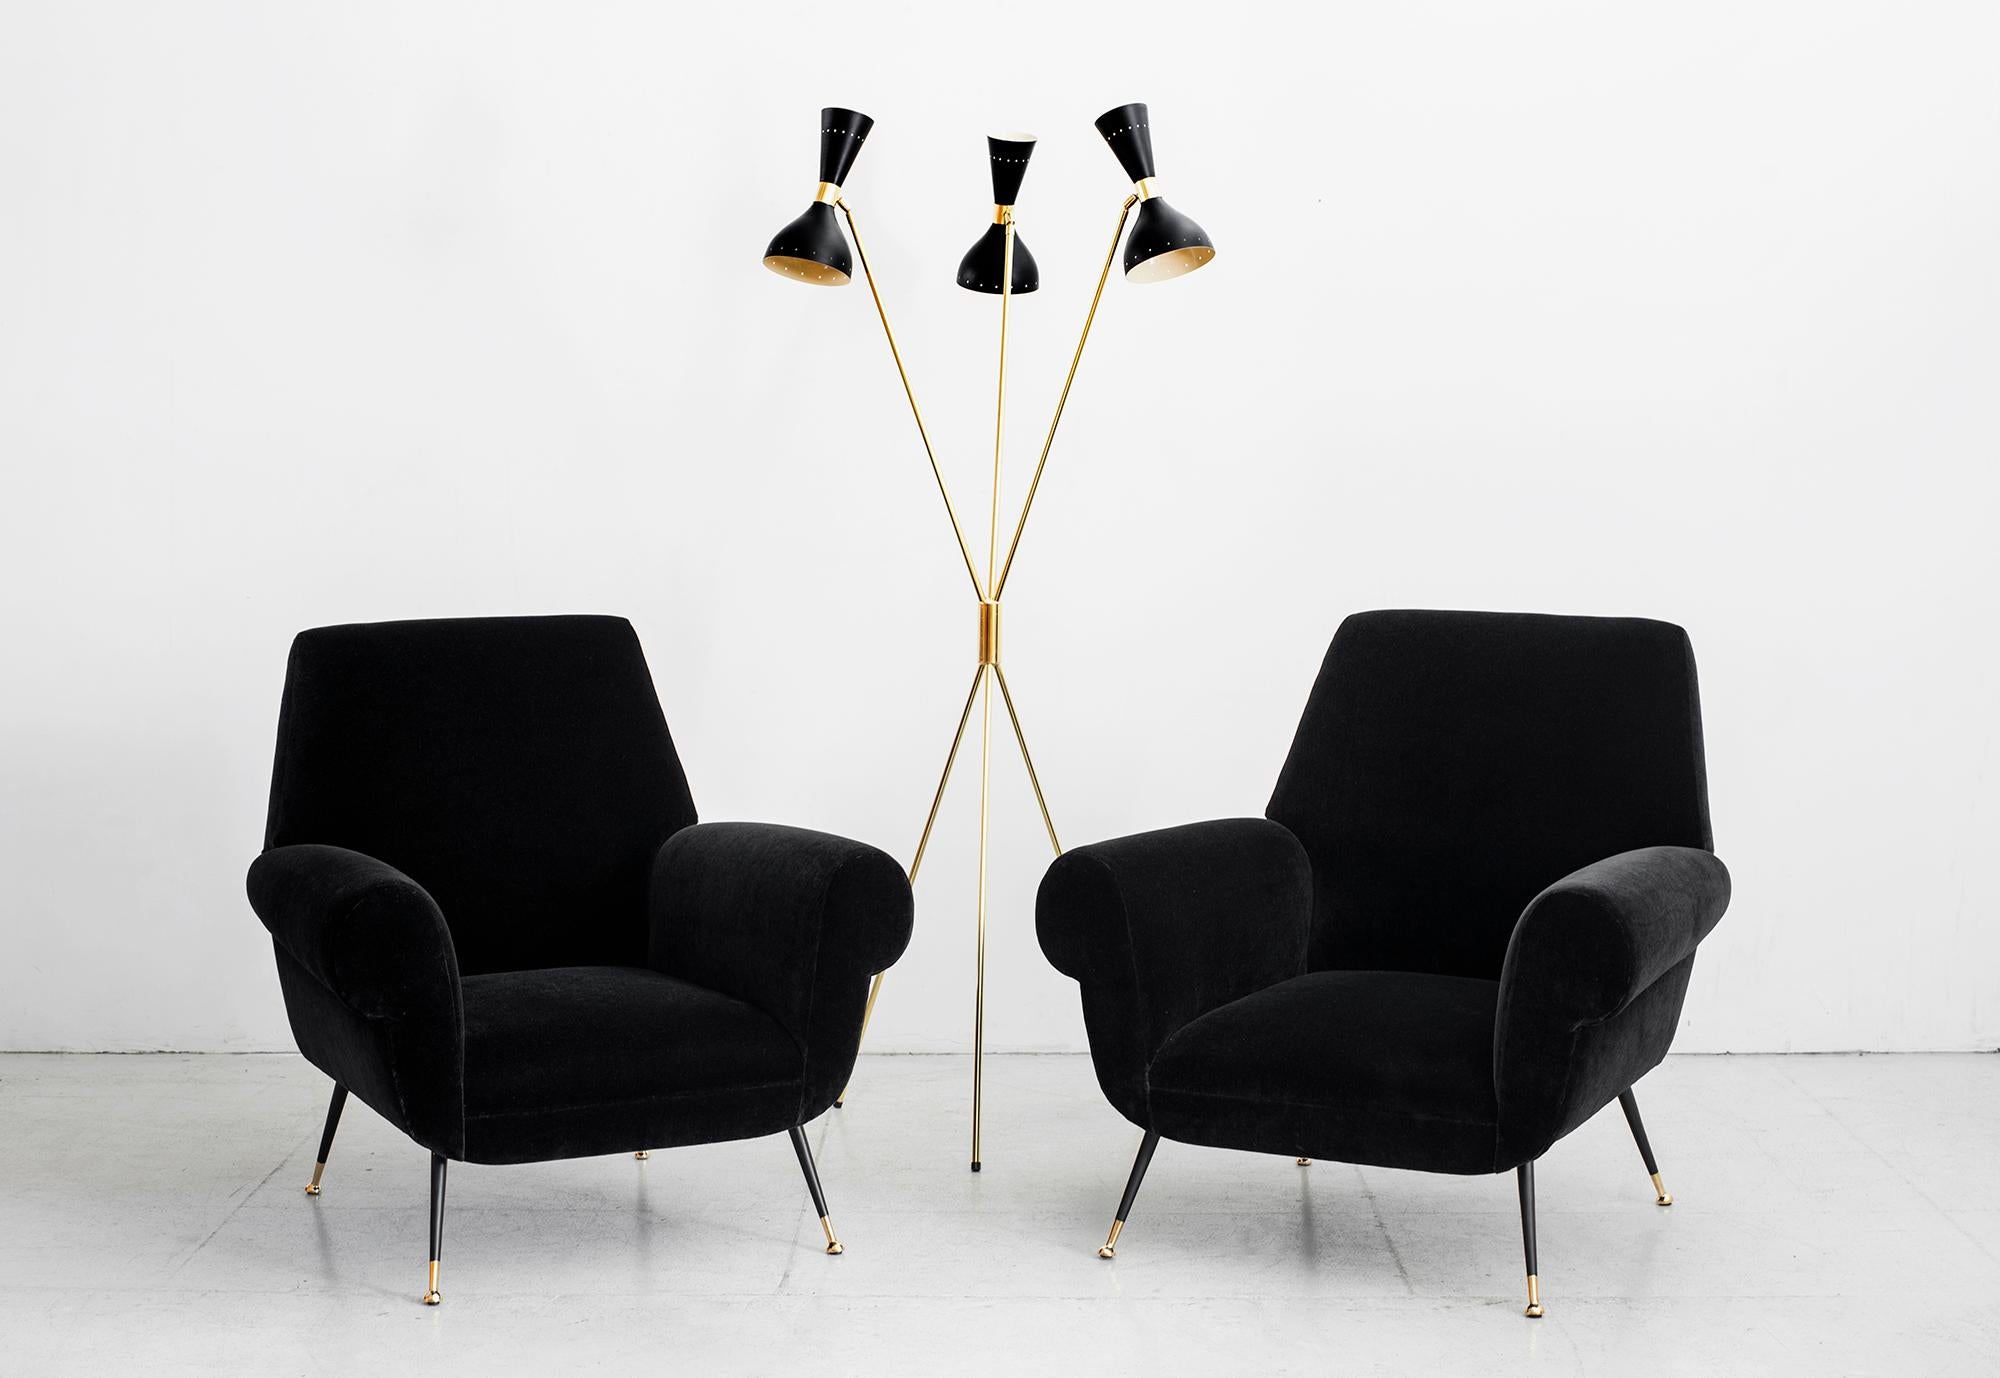 Gorgeous Italian 1960s club chairs in the style of Marco Zanuso newly upholstered in black mohair with
polished brass legs.
Fantastic large scale and shape.